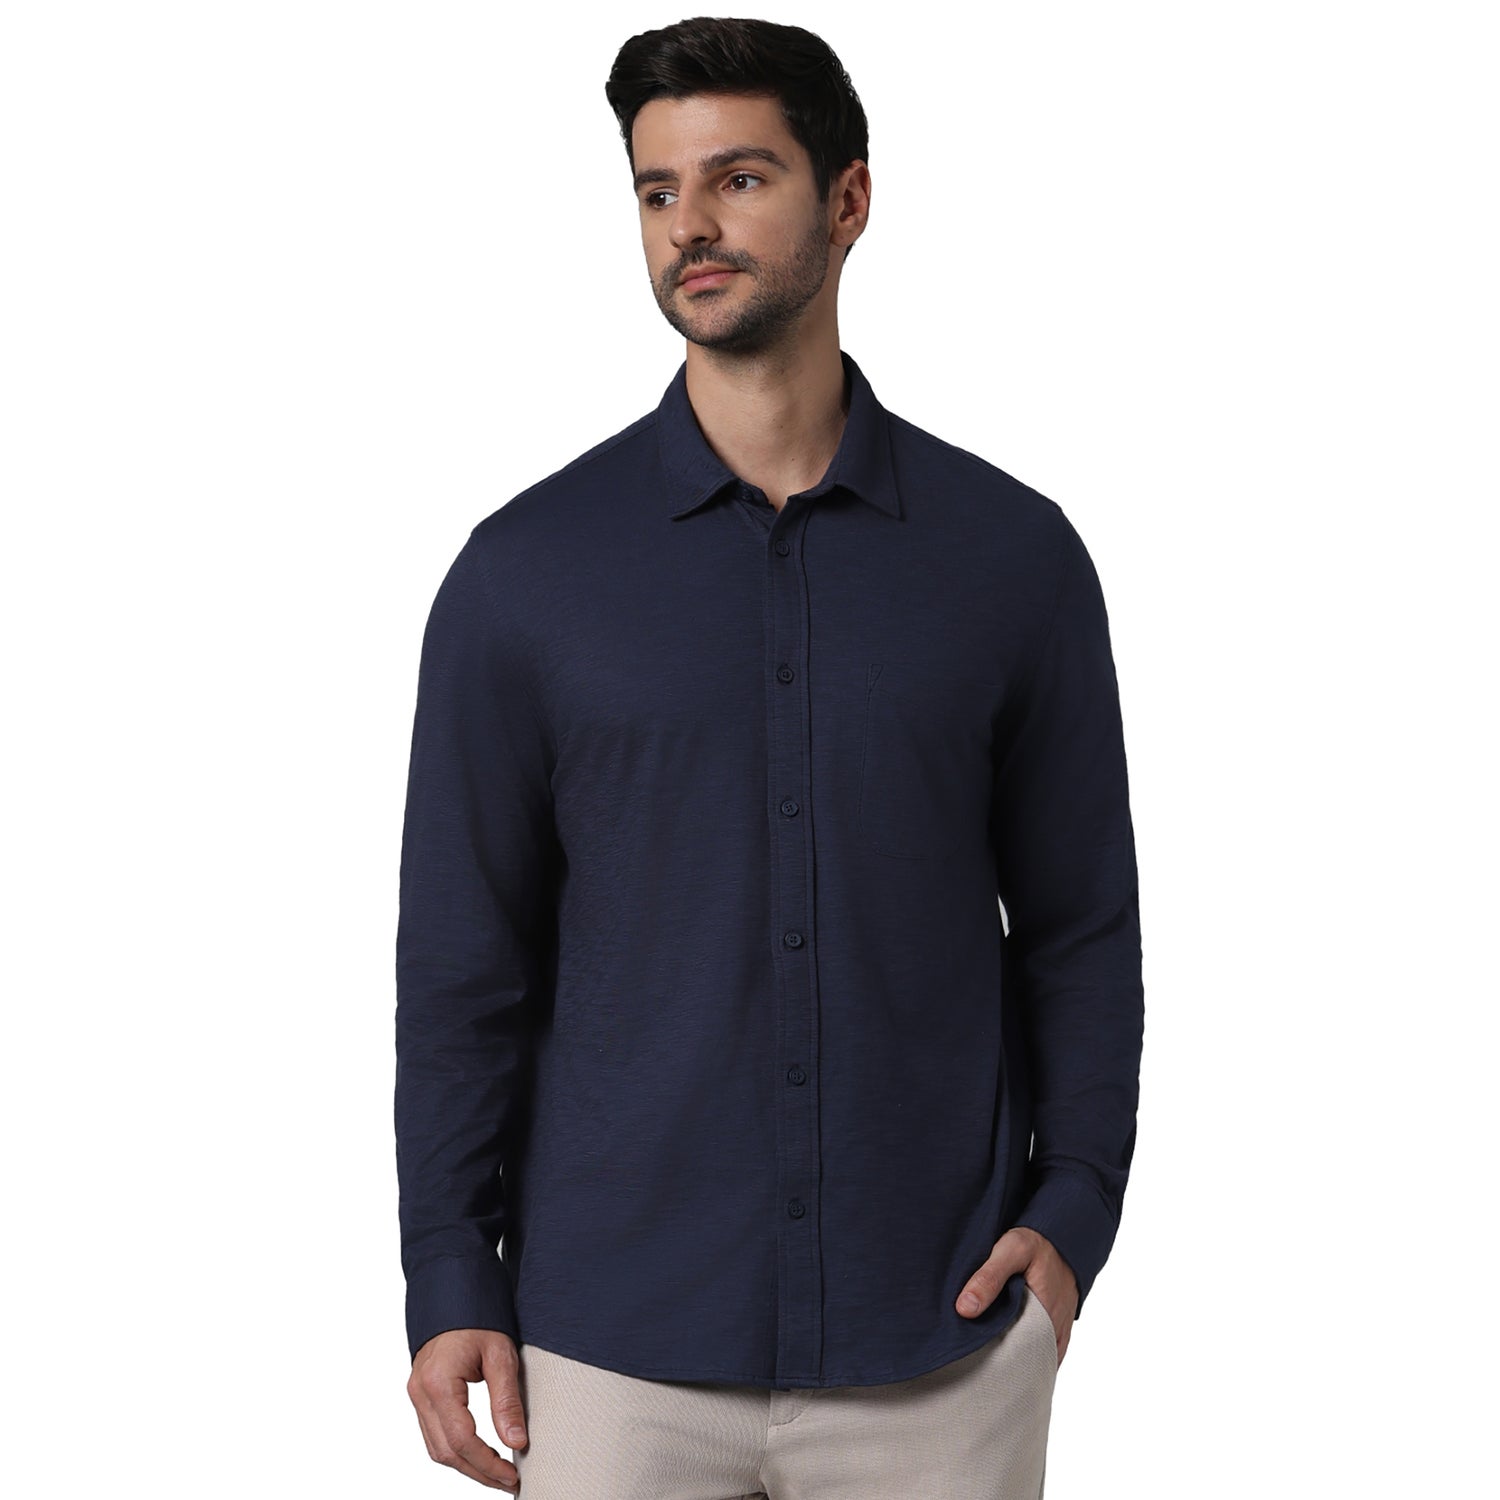 Men Navy Blue Spread Collar Solid Regular Fit Cotton Knit Casual Shirt (GASELLE)